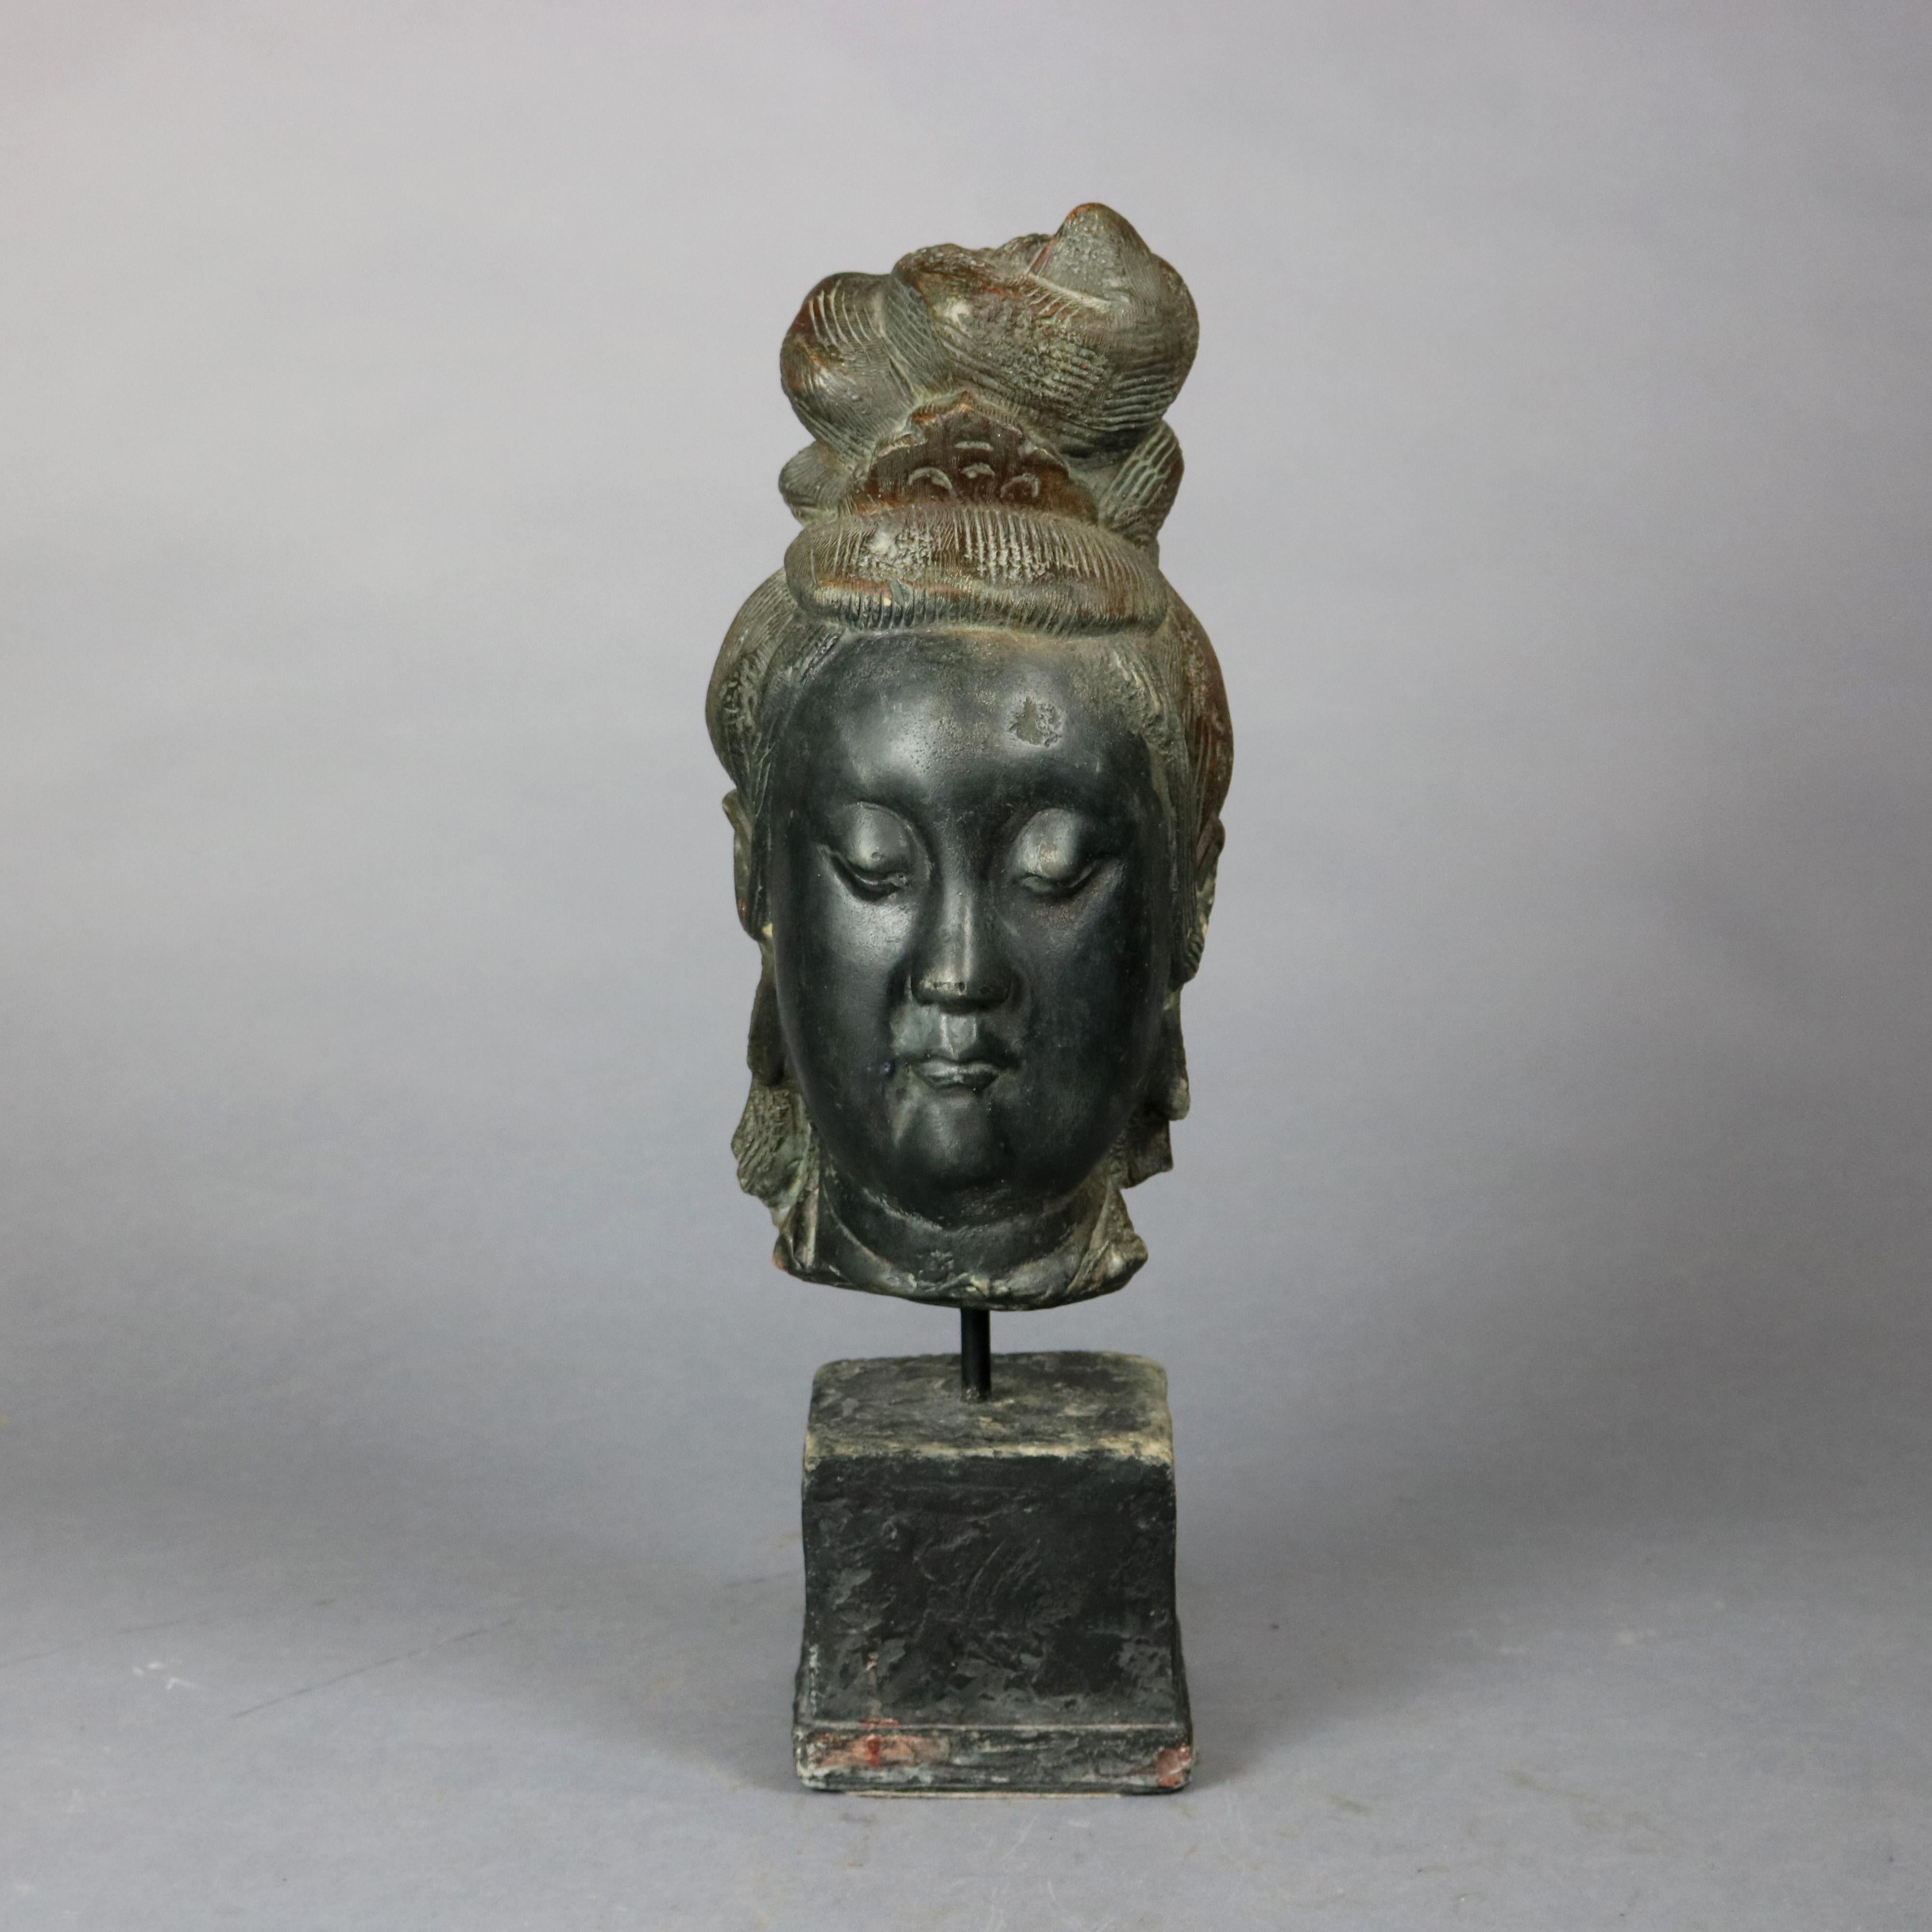 An antique Asian bust sculpture offers bronze or bronze clad Buddha mounted on post with base, c1930

Measures - 19.75'' H x 6.5'' W x 7'' D.